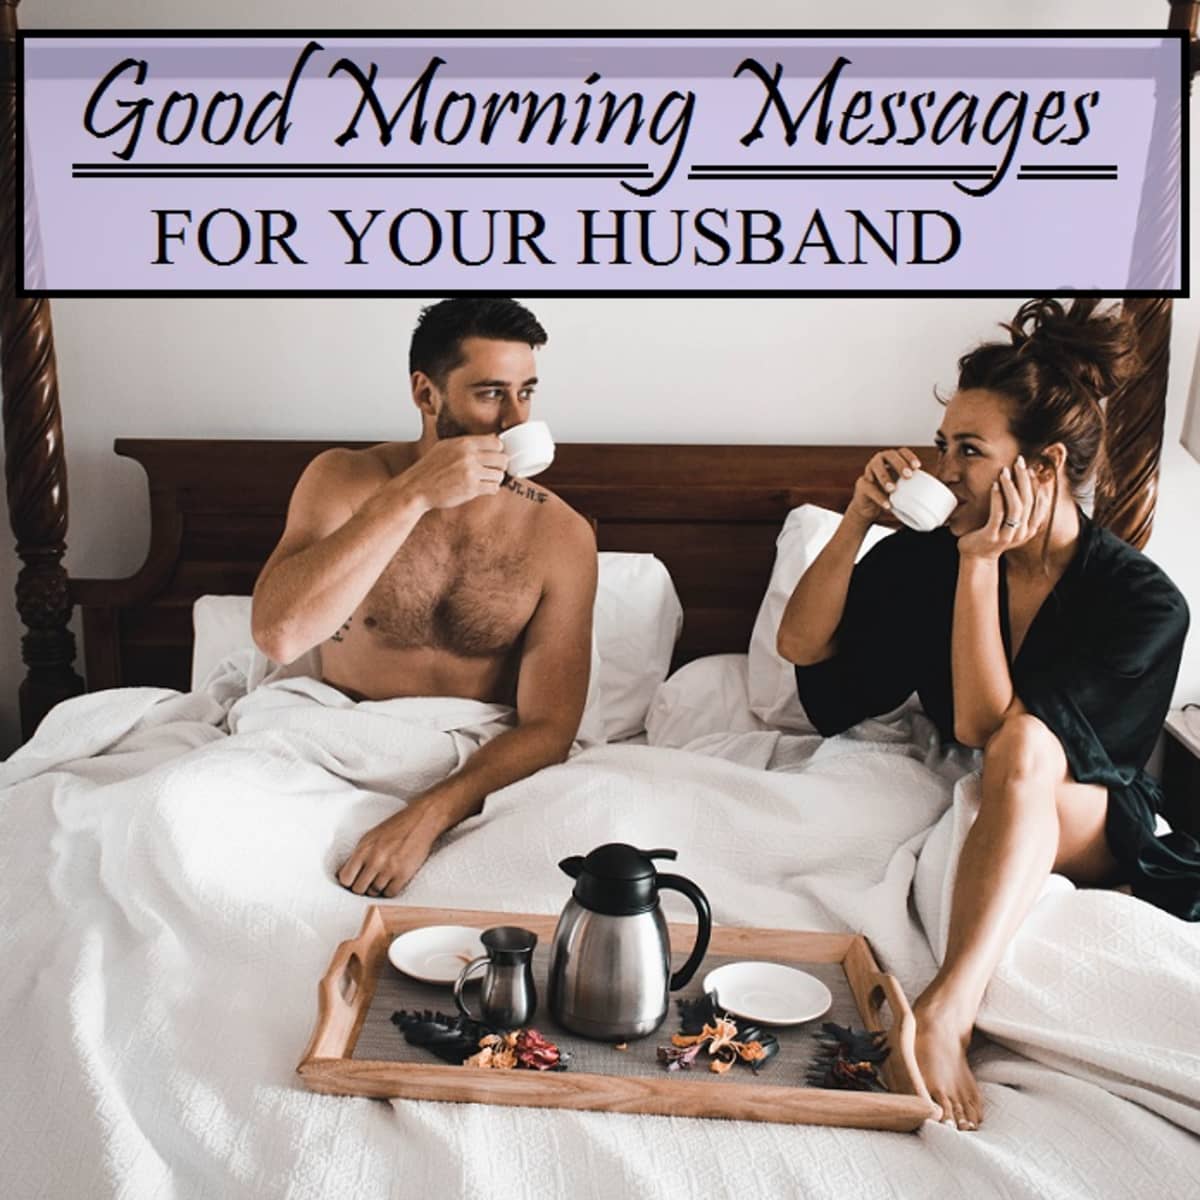 Sweet Good Morning Messages for Your Husband - PairedLife